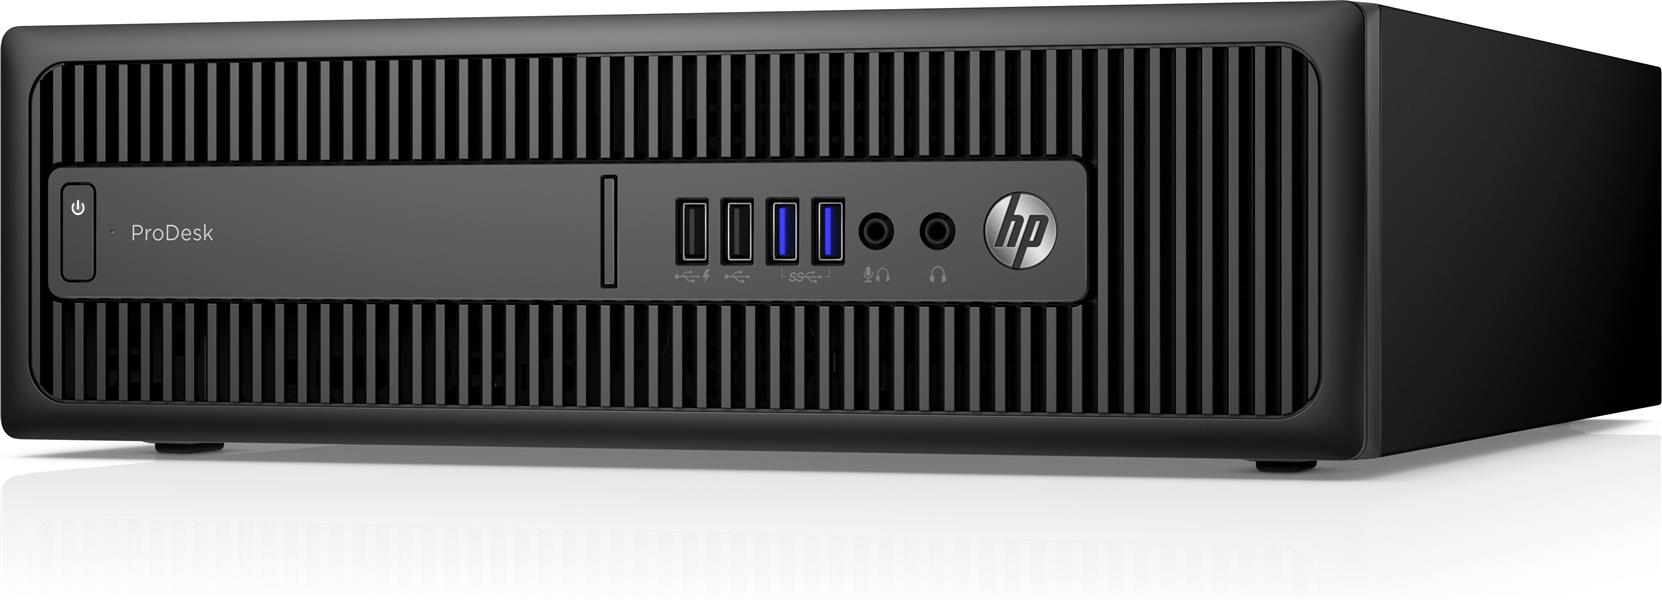 HP ProDesk 600 G2 small form factor pc